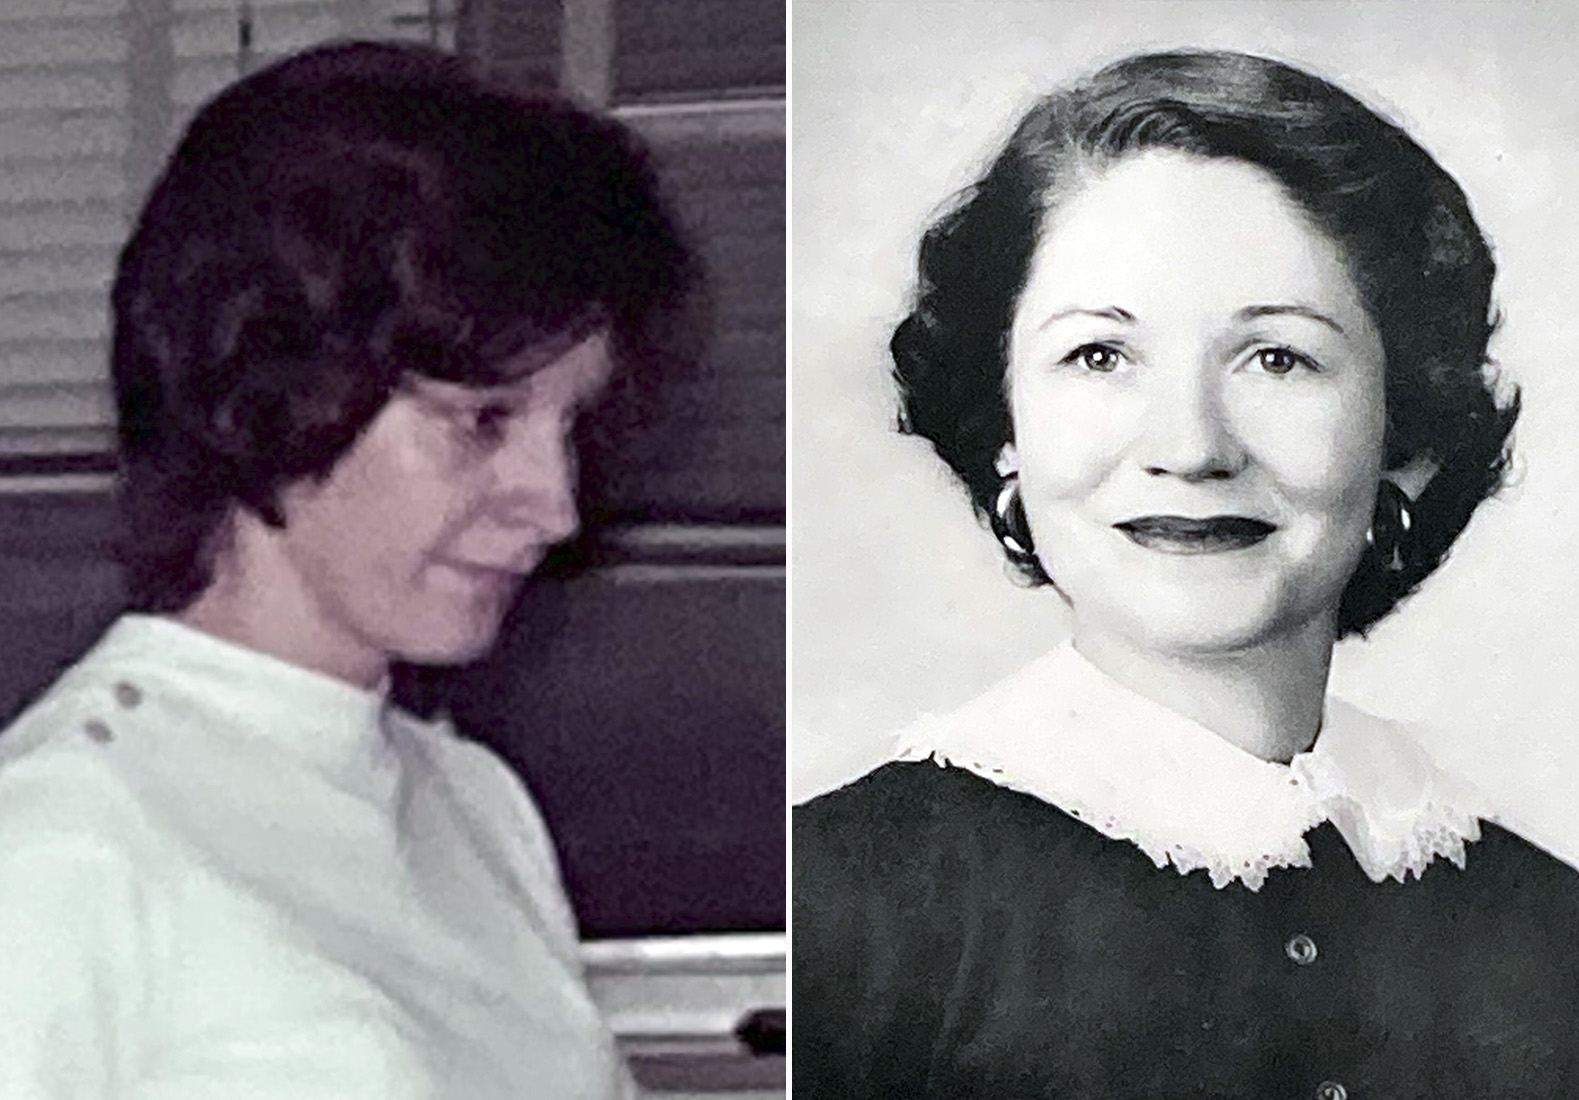 The left hand photo shows Betsy Hug Hollingsworth working as a medical technologist at St. Vincent Infirmary, while the right hand photo shows Beth Bevill Hollingsworth in her yearbook photo from Little Rock Junior College.